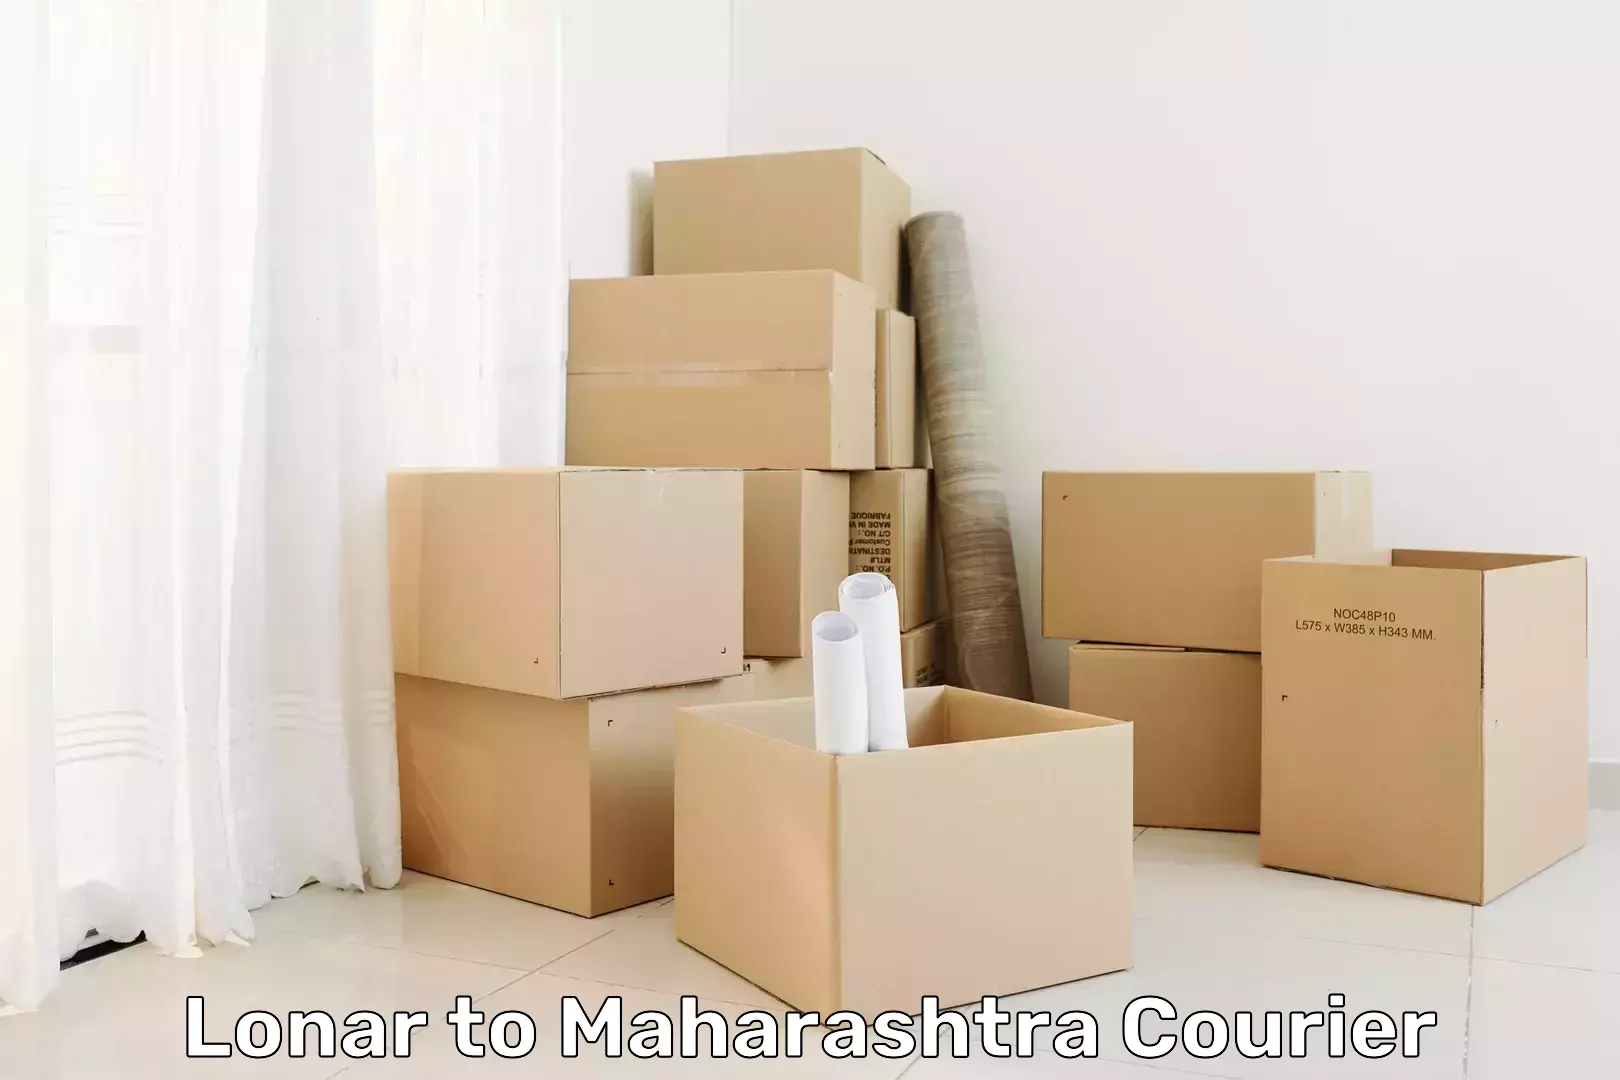 Express courier capabilities Lonar to Nagpur